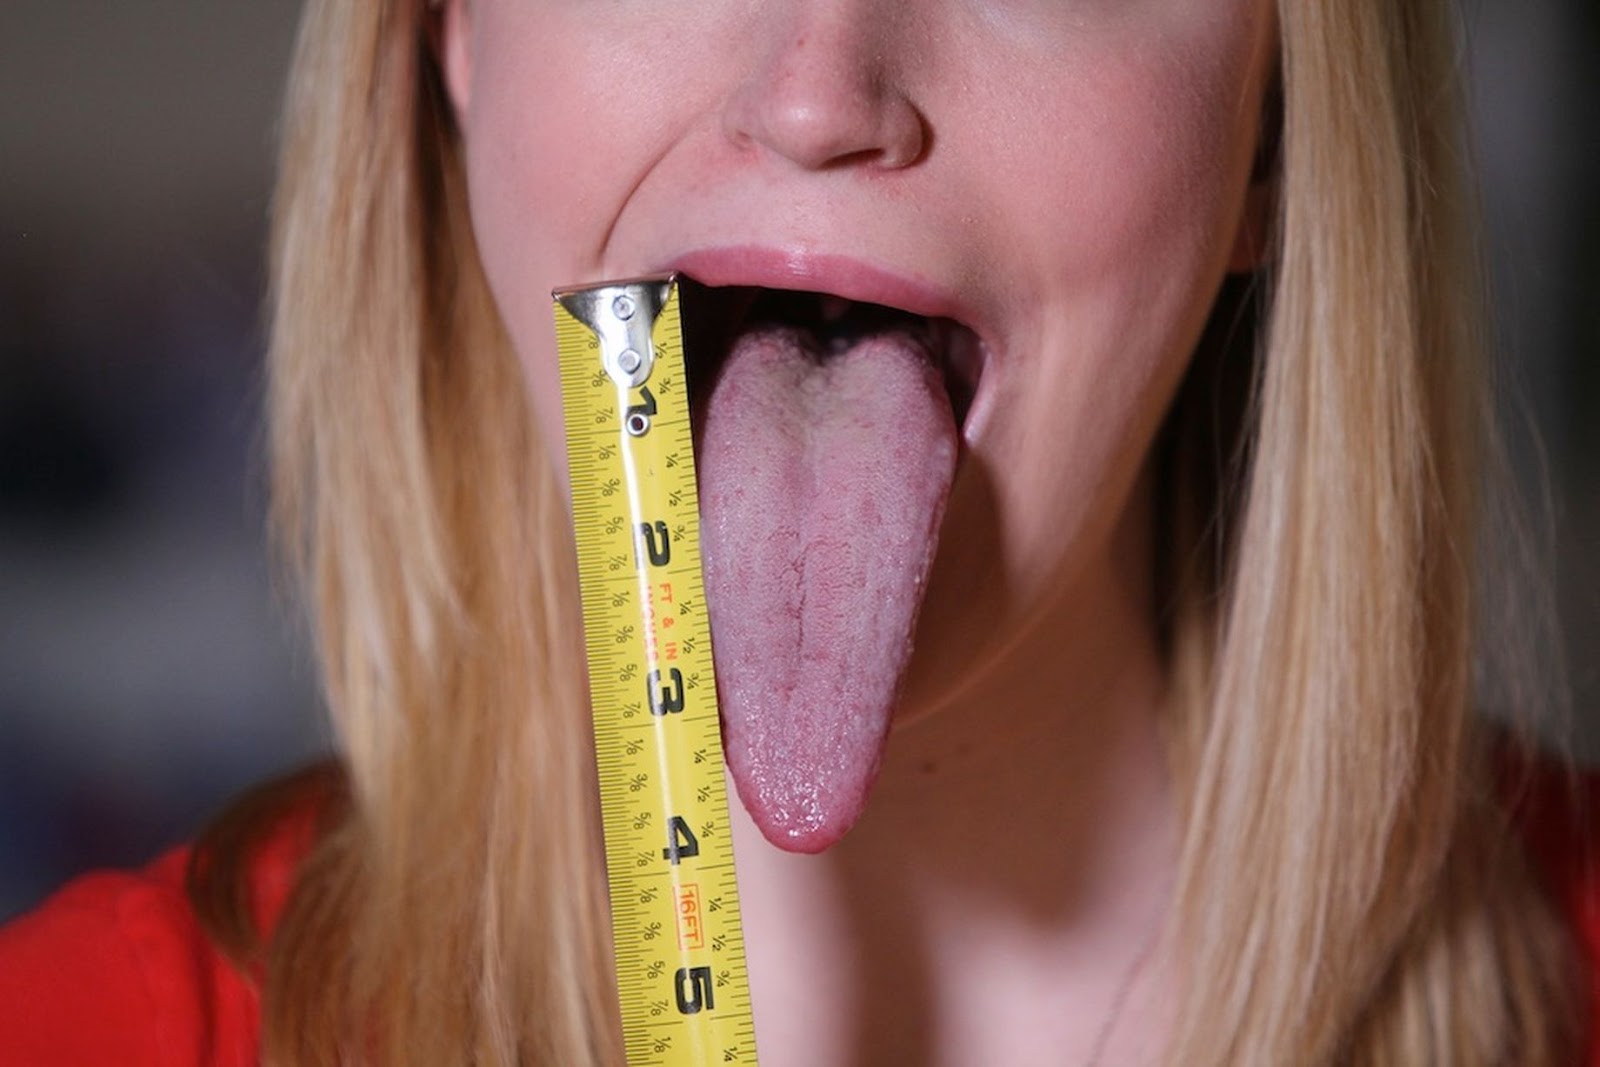 Meet Adrianne Lewis, The 18 Year Old Girl With The World’s Longest Tongue! 